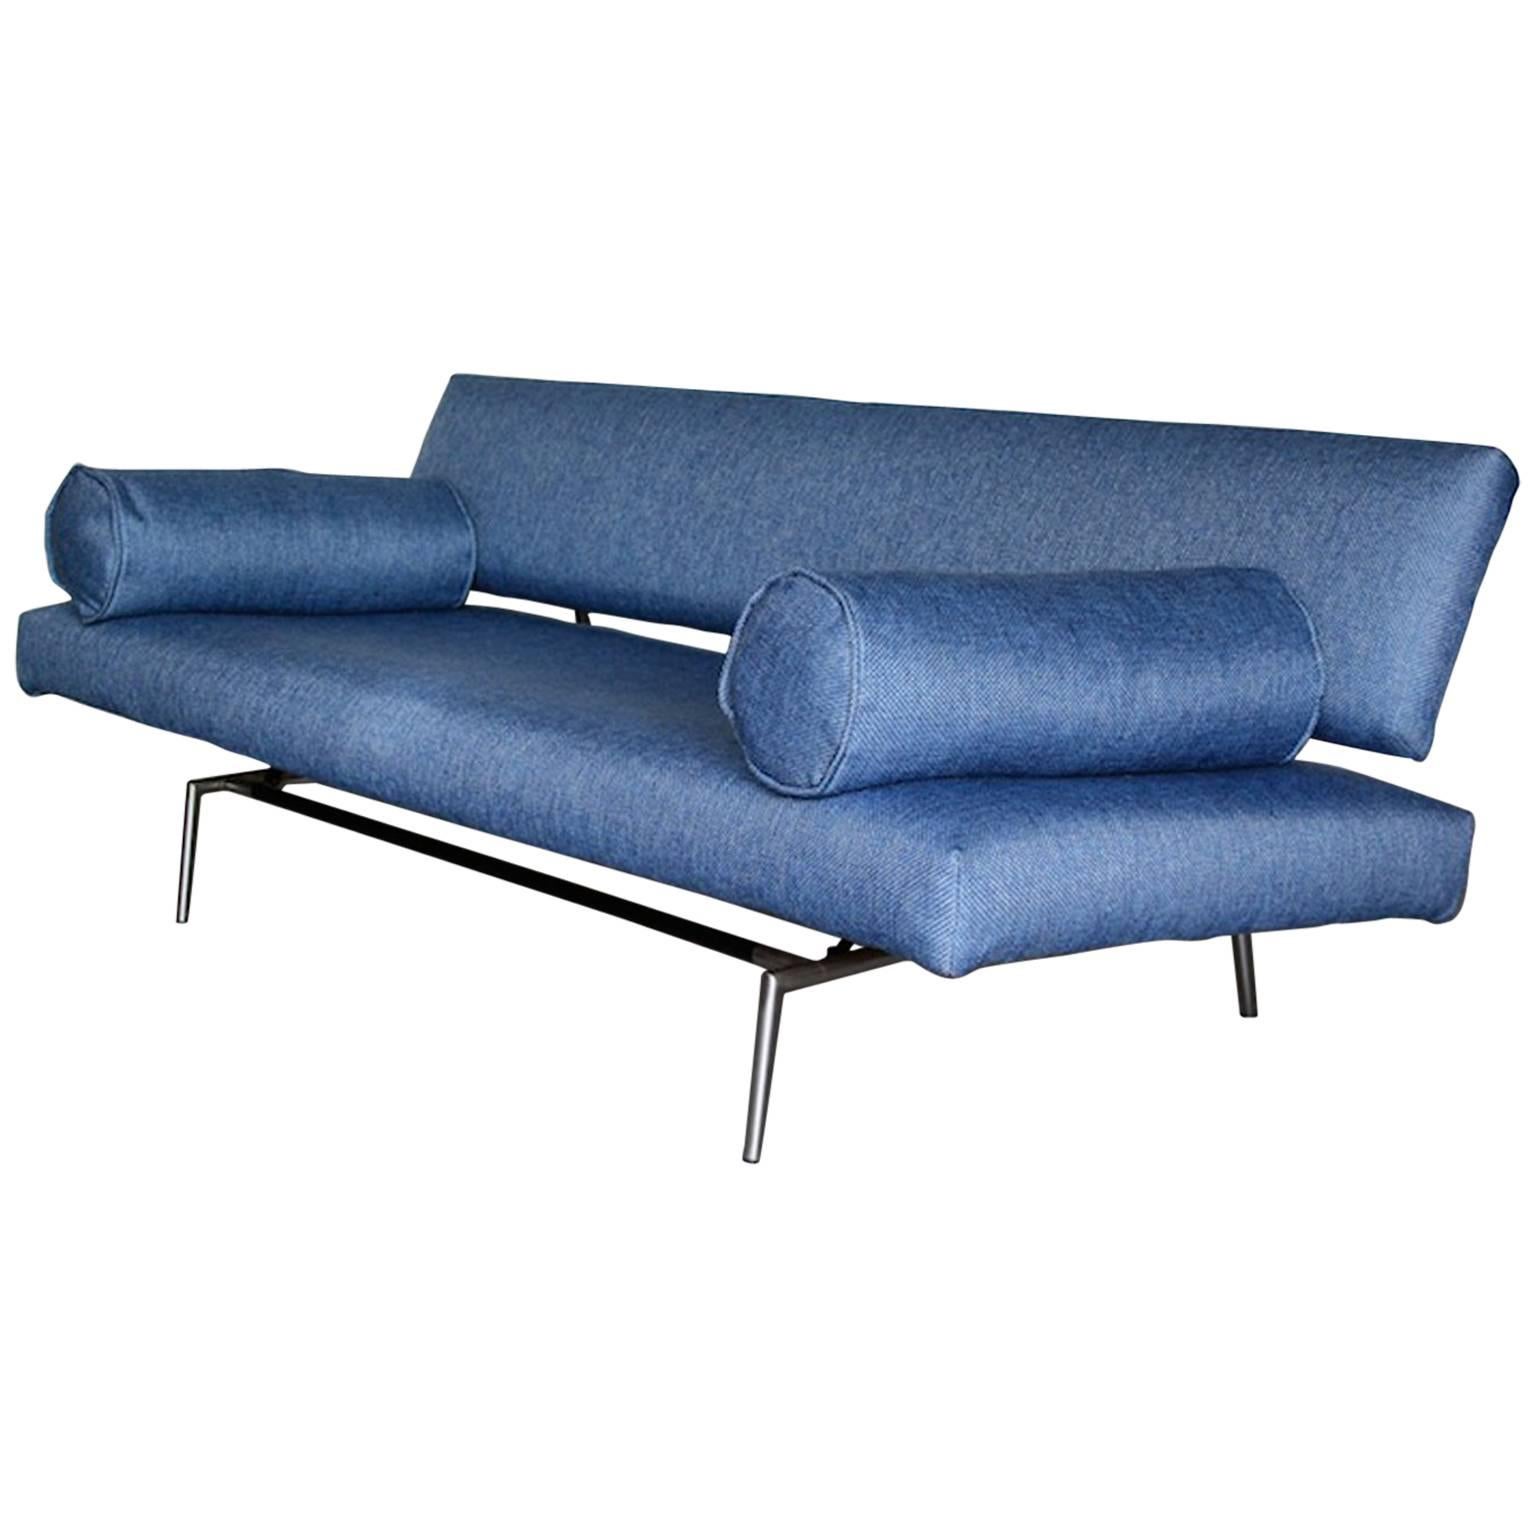 BR 02.7 Sleeper Sofa with Arm Rests by Martin Visser for 't Spectrum, Dutch For Sale